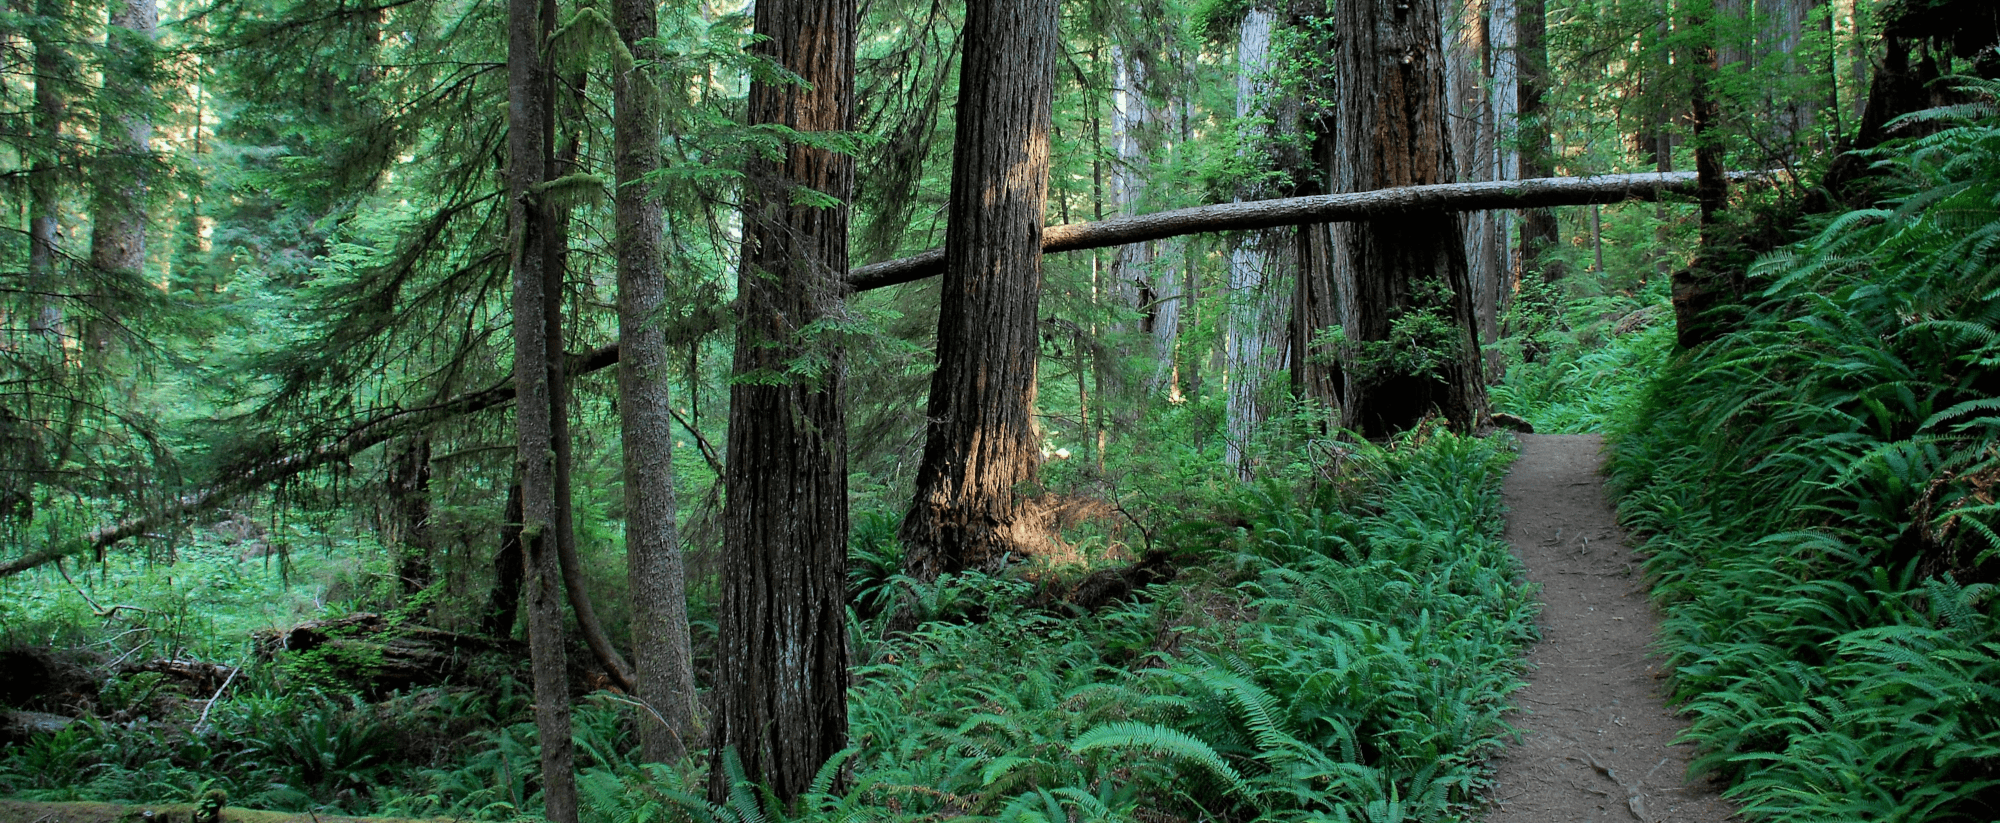 Picture of Prairie Creek Redwoods State Park in Orick